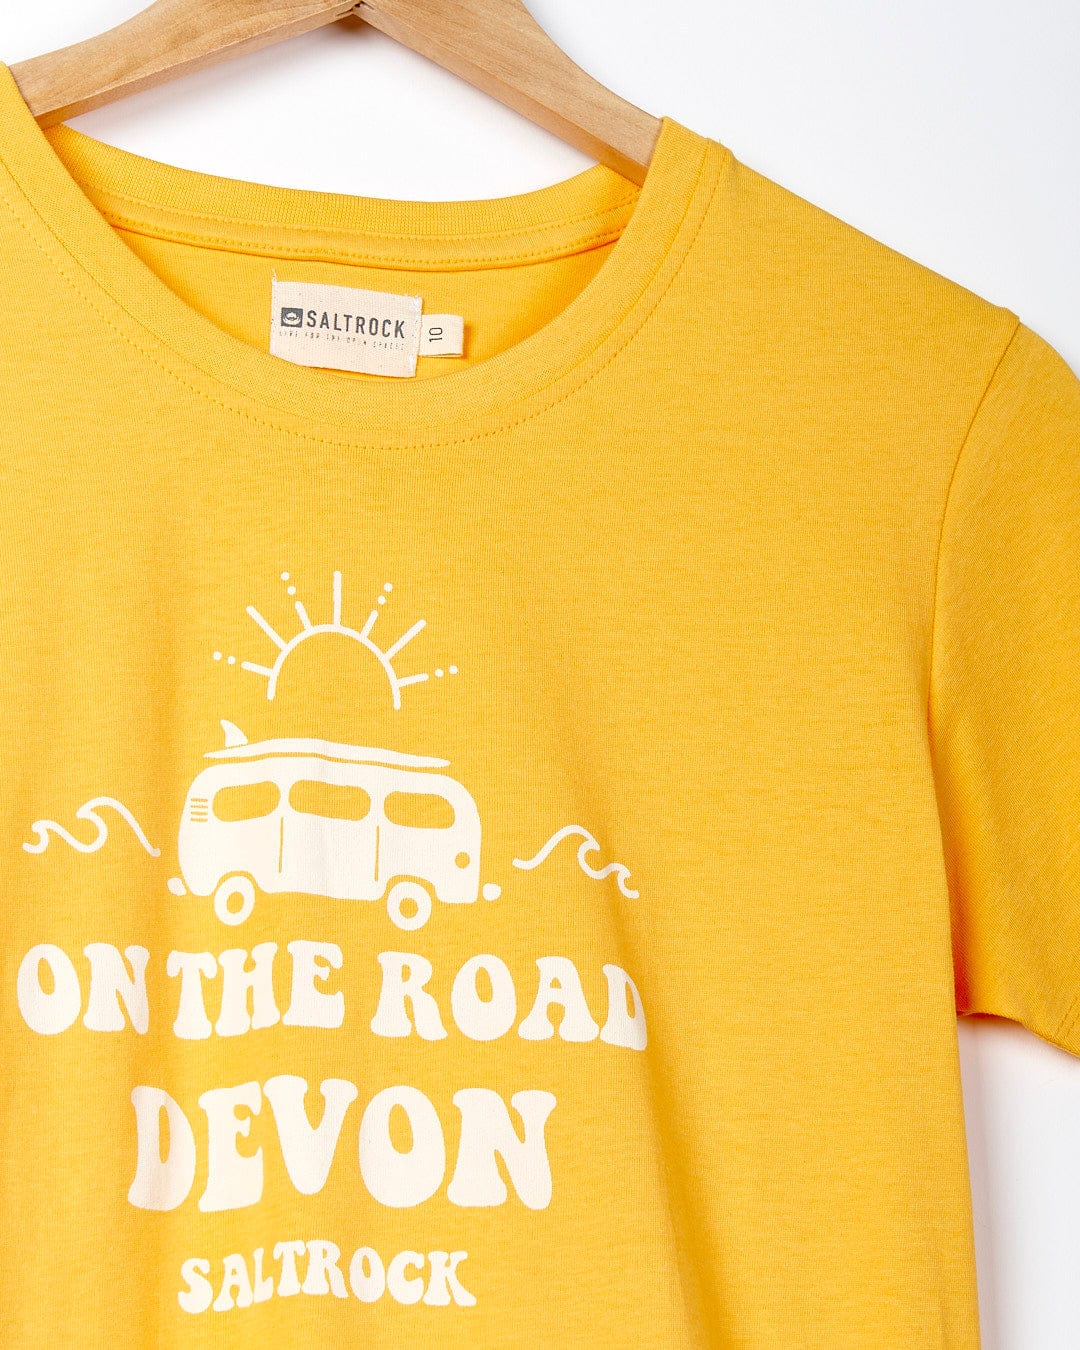 A Saltrock yellow t-shirt that says On The Road Devon.